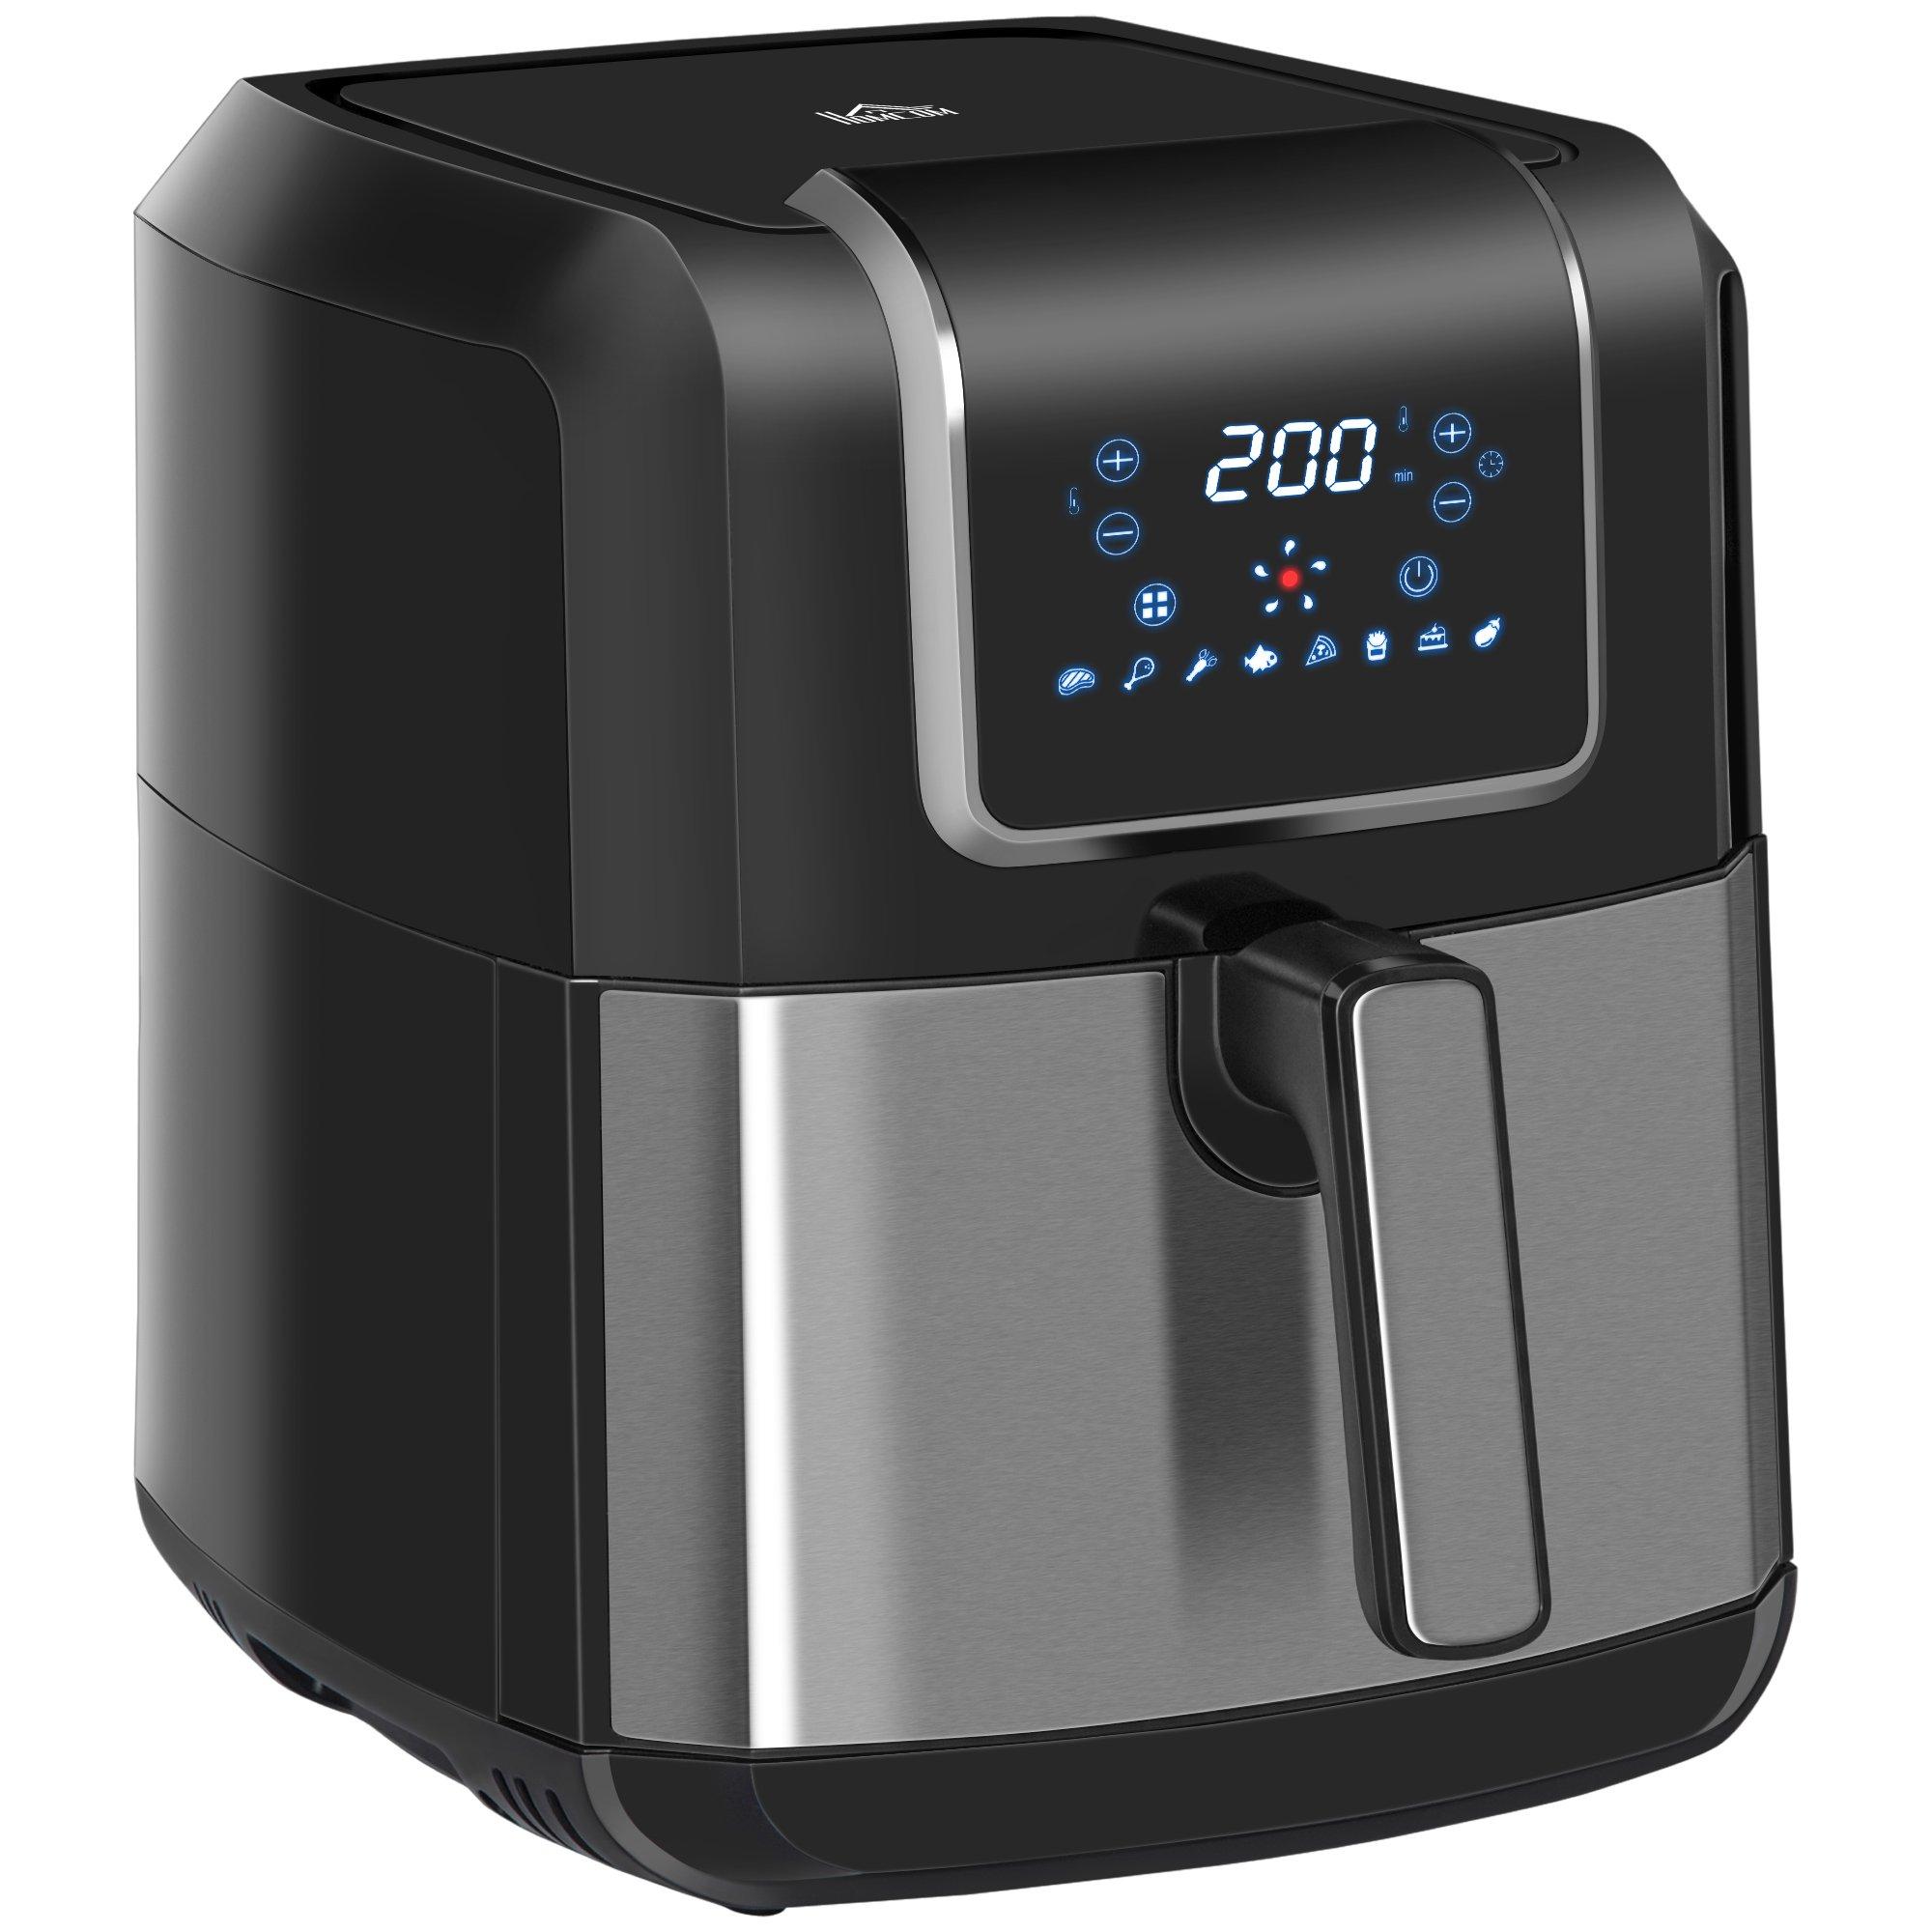 HOMCOM Air Fryer 1700W 6.5L with Digital Display Timer Oil Less Low Cooking